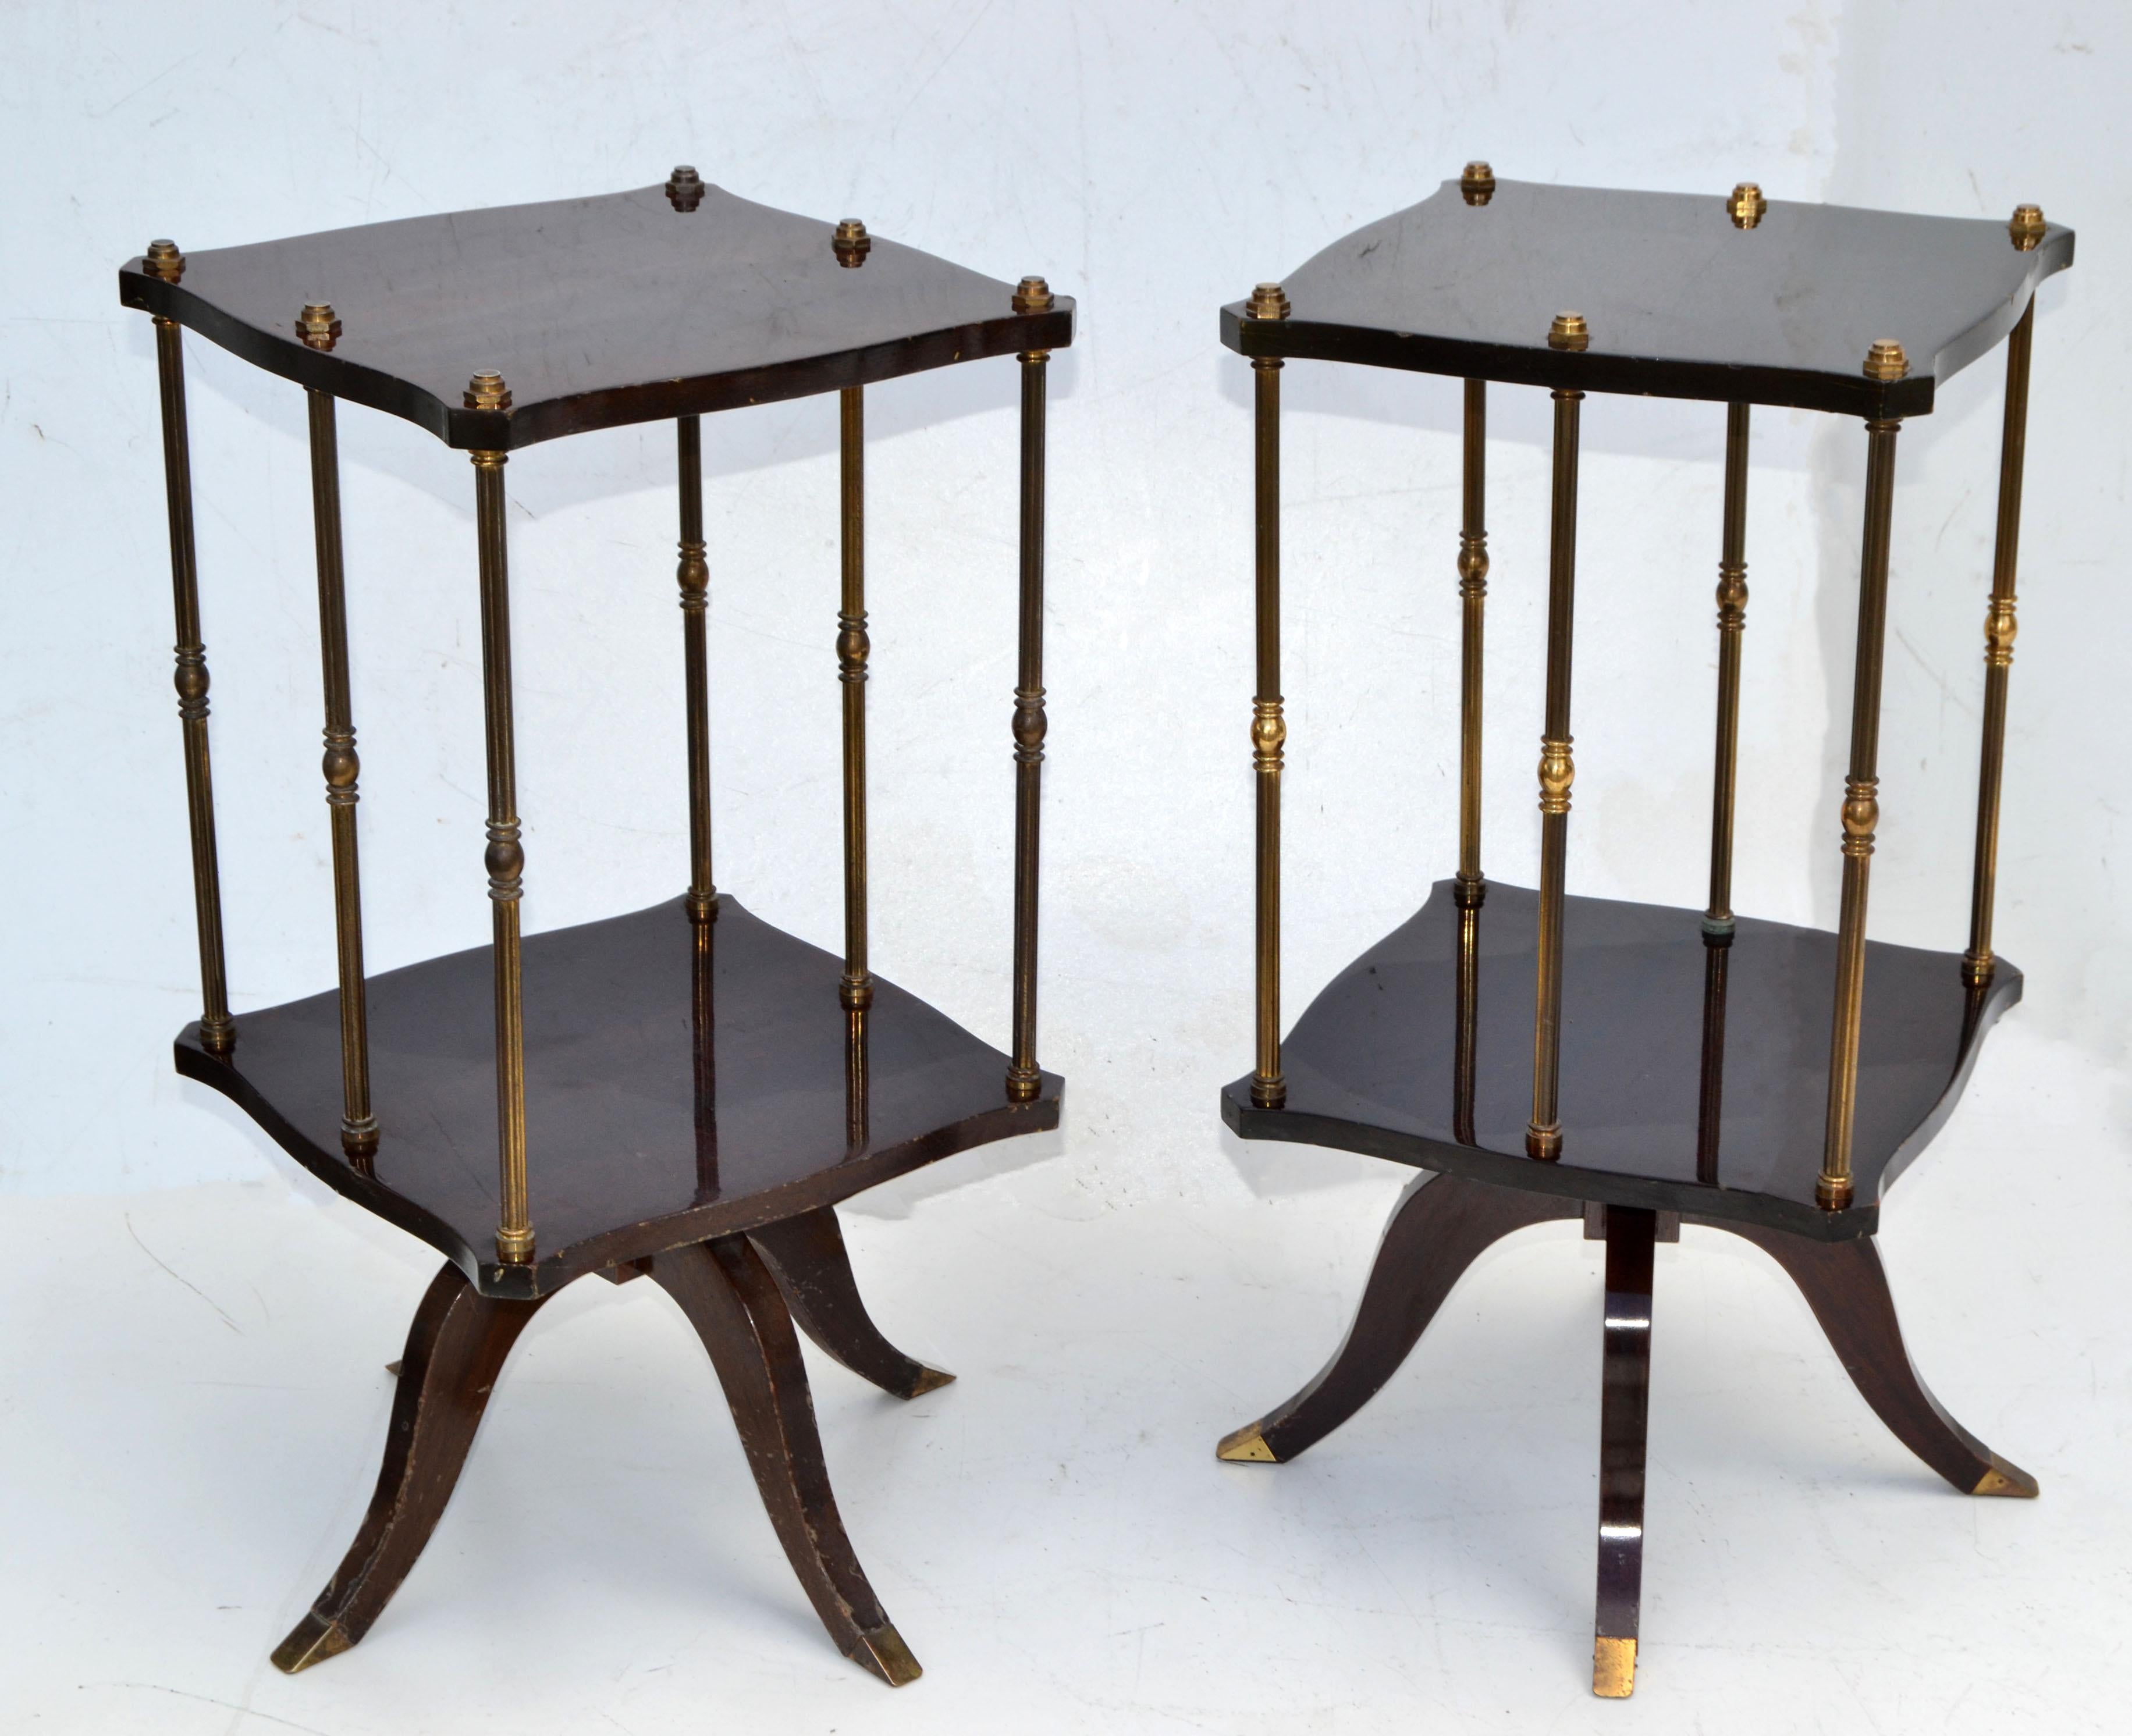 Superb Pair of square swivel Drink Tables, Sofa Tables or Side Tables in laminated and lacquered Mahogany with masterful crafted Brass Details.
The elegant feet of the base have brass sabots.
The swivel function works smoothly and makes these